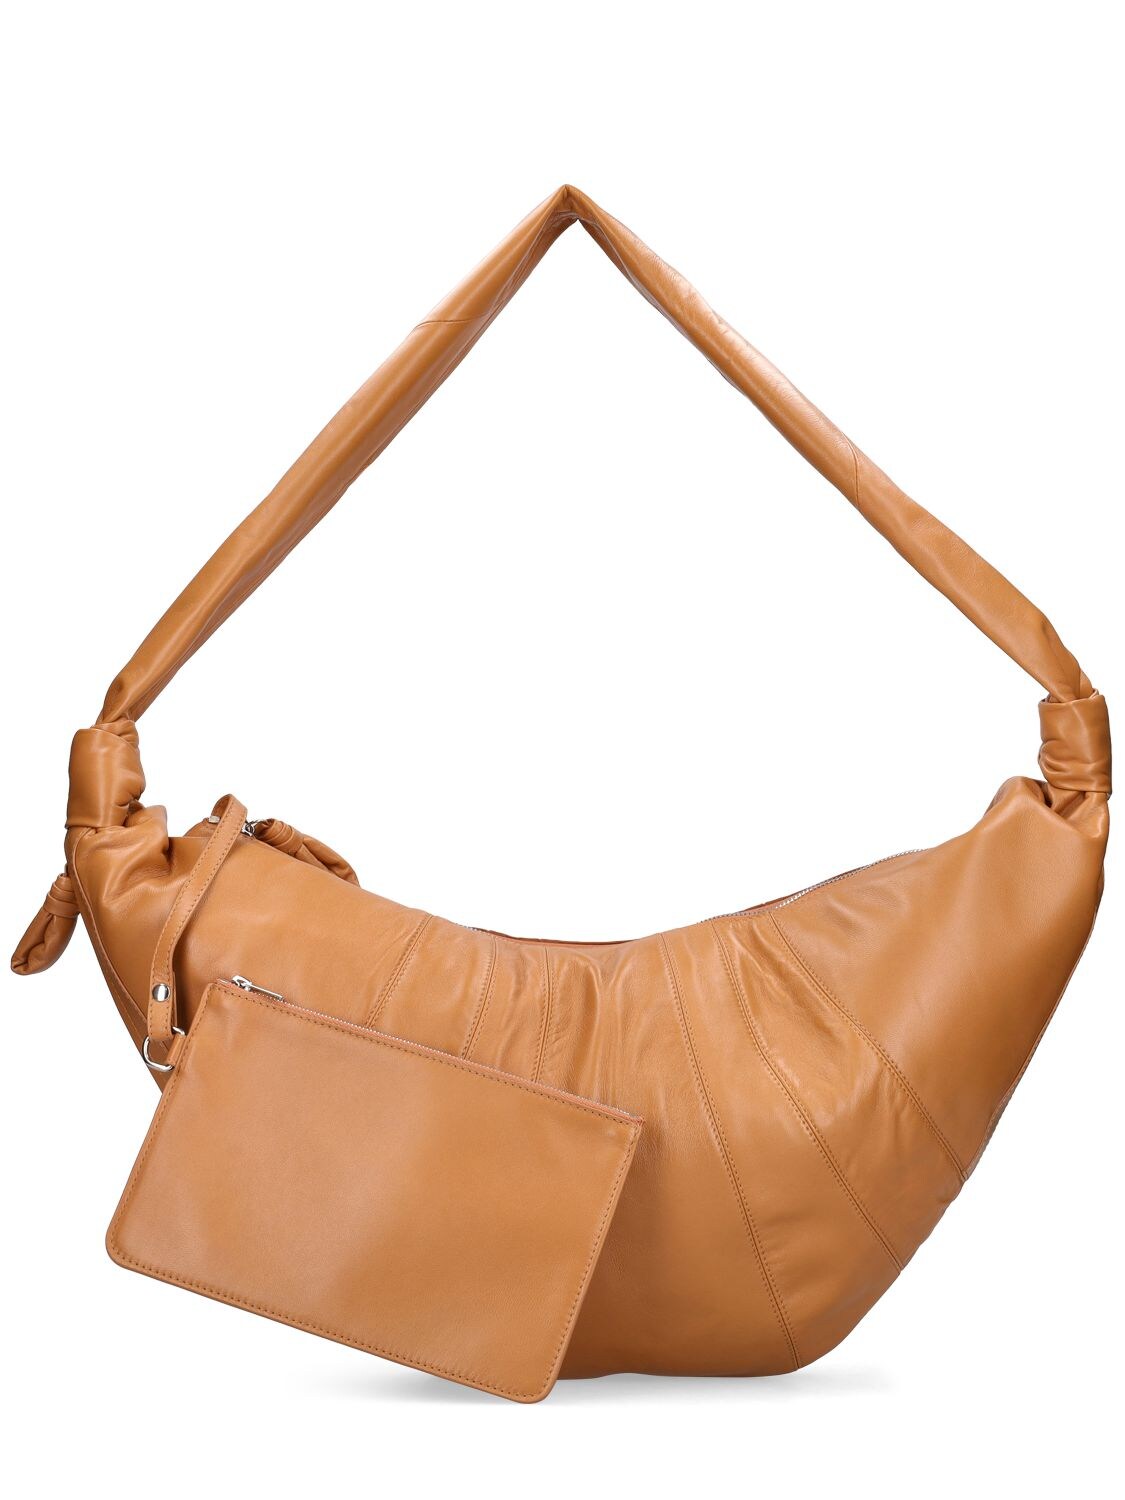 Shop Lemaire Large Croissant Leather Crossbody Bag In Sugar Brown